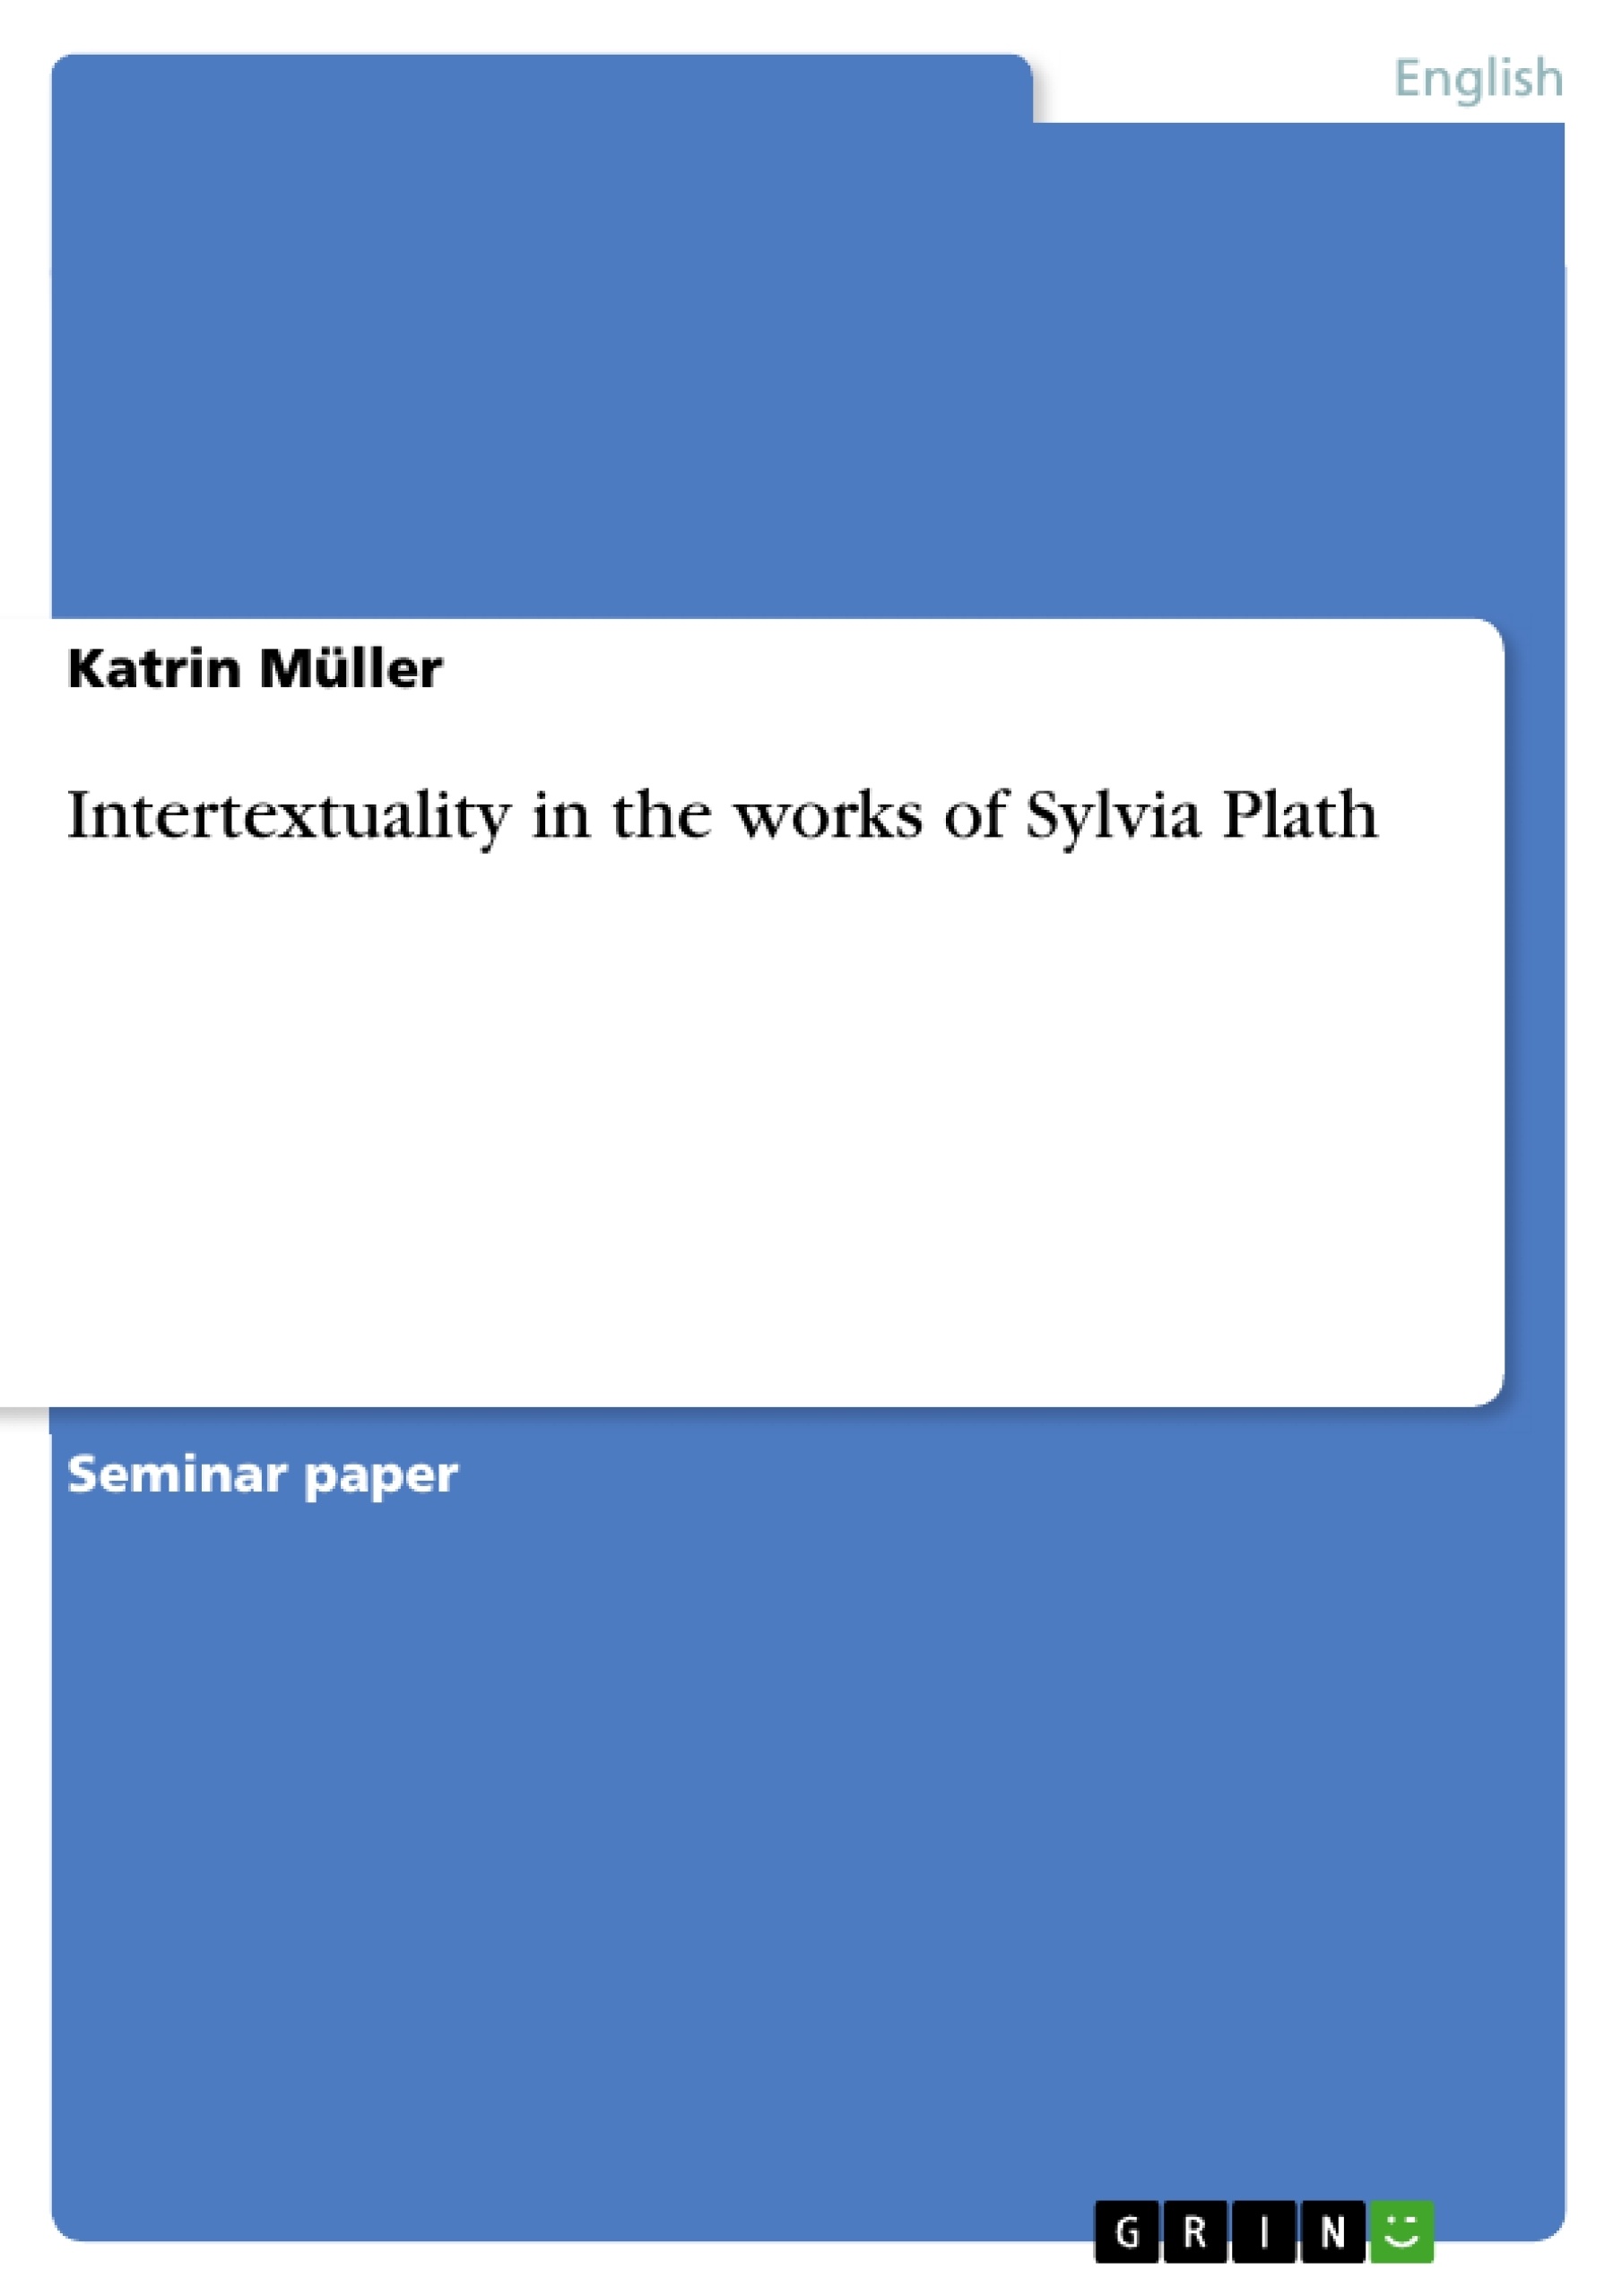 Title: Intertextuality in the works of Sylvia Plath